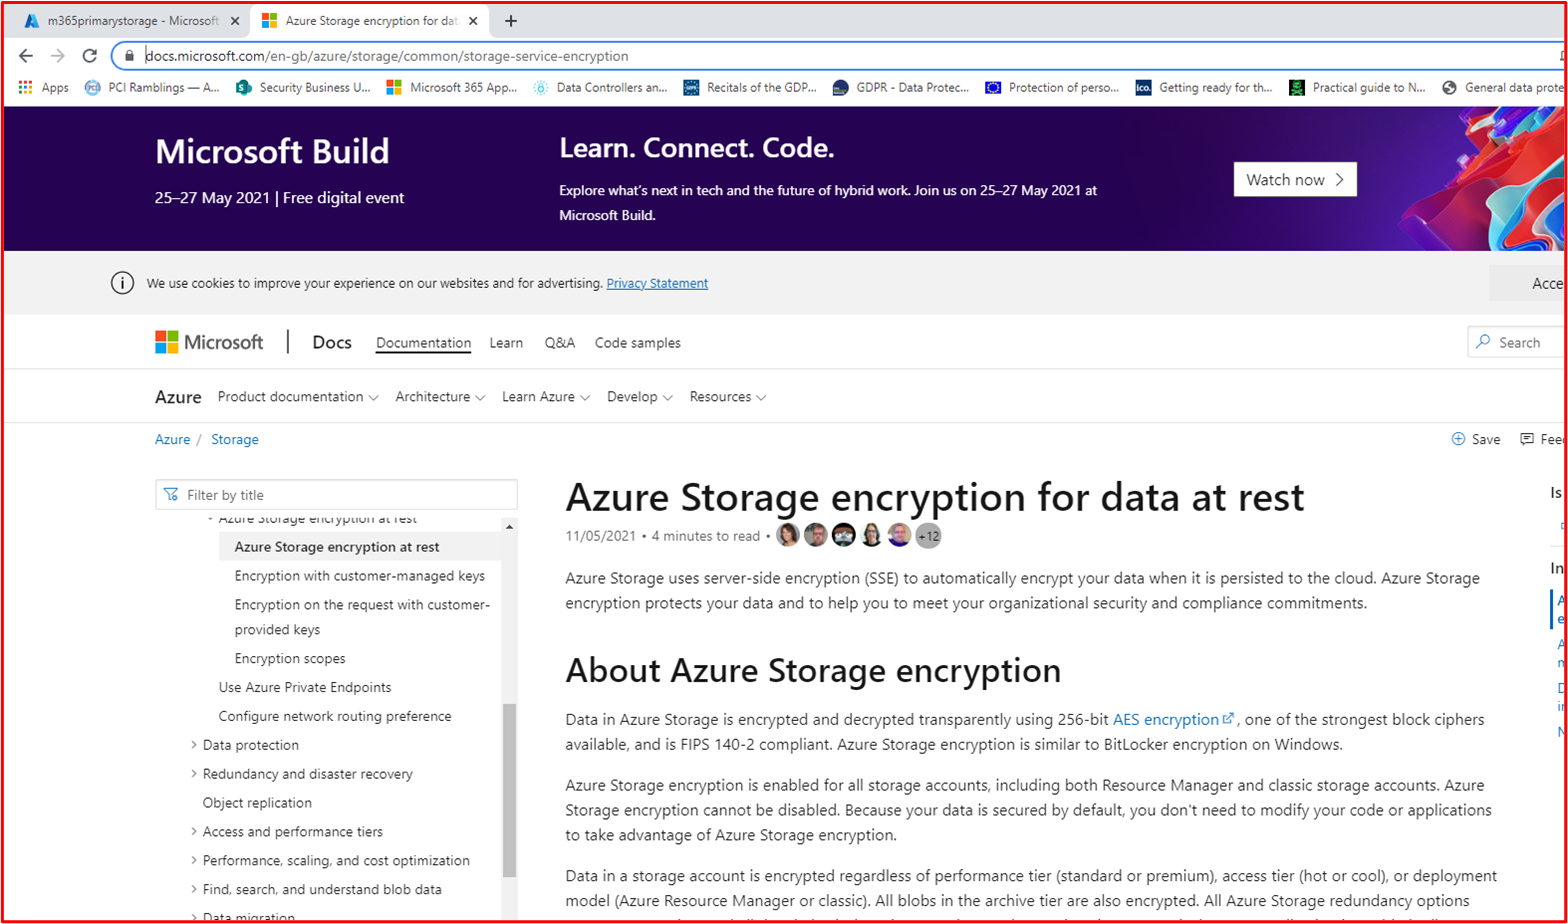 screenshot shows that Azure Storage uses AES-256 for encryption